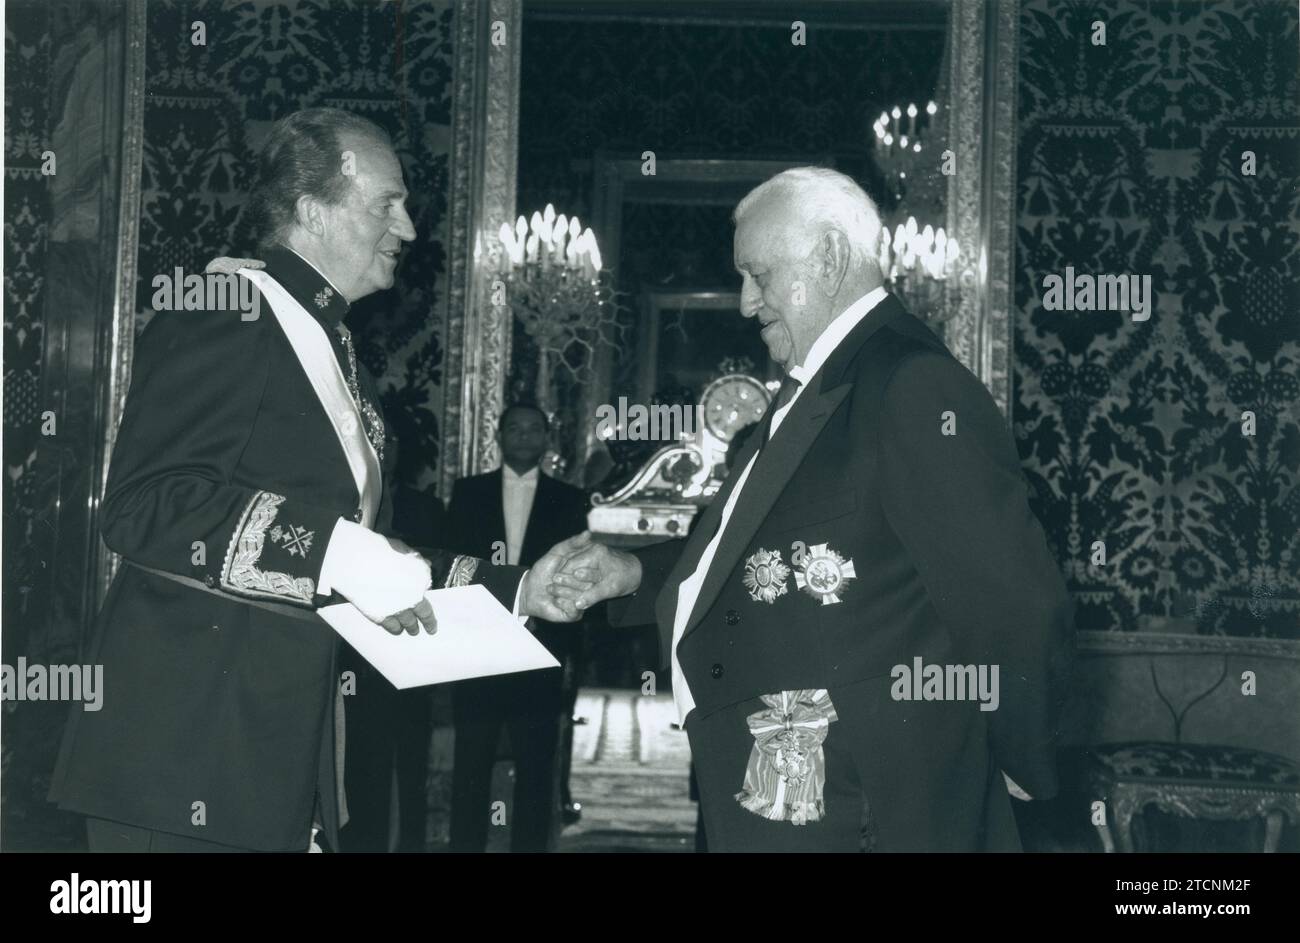 Madrid, 2/27/1995. Presentation of credentials from the ambassador of the Dominican Republic, Fabio Florentino Herrera Cabral, to King Juan Carlos, at the Royal Palace. Credit: Album / Archivo ABC / Luis Ramírez Stock Photo